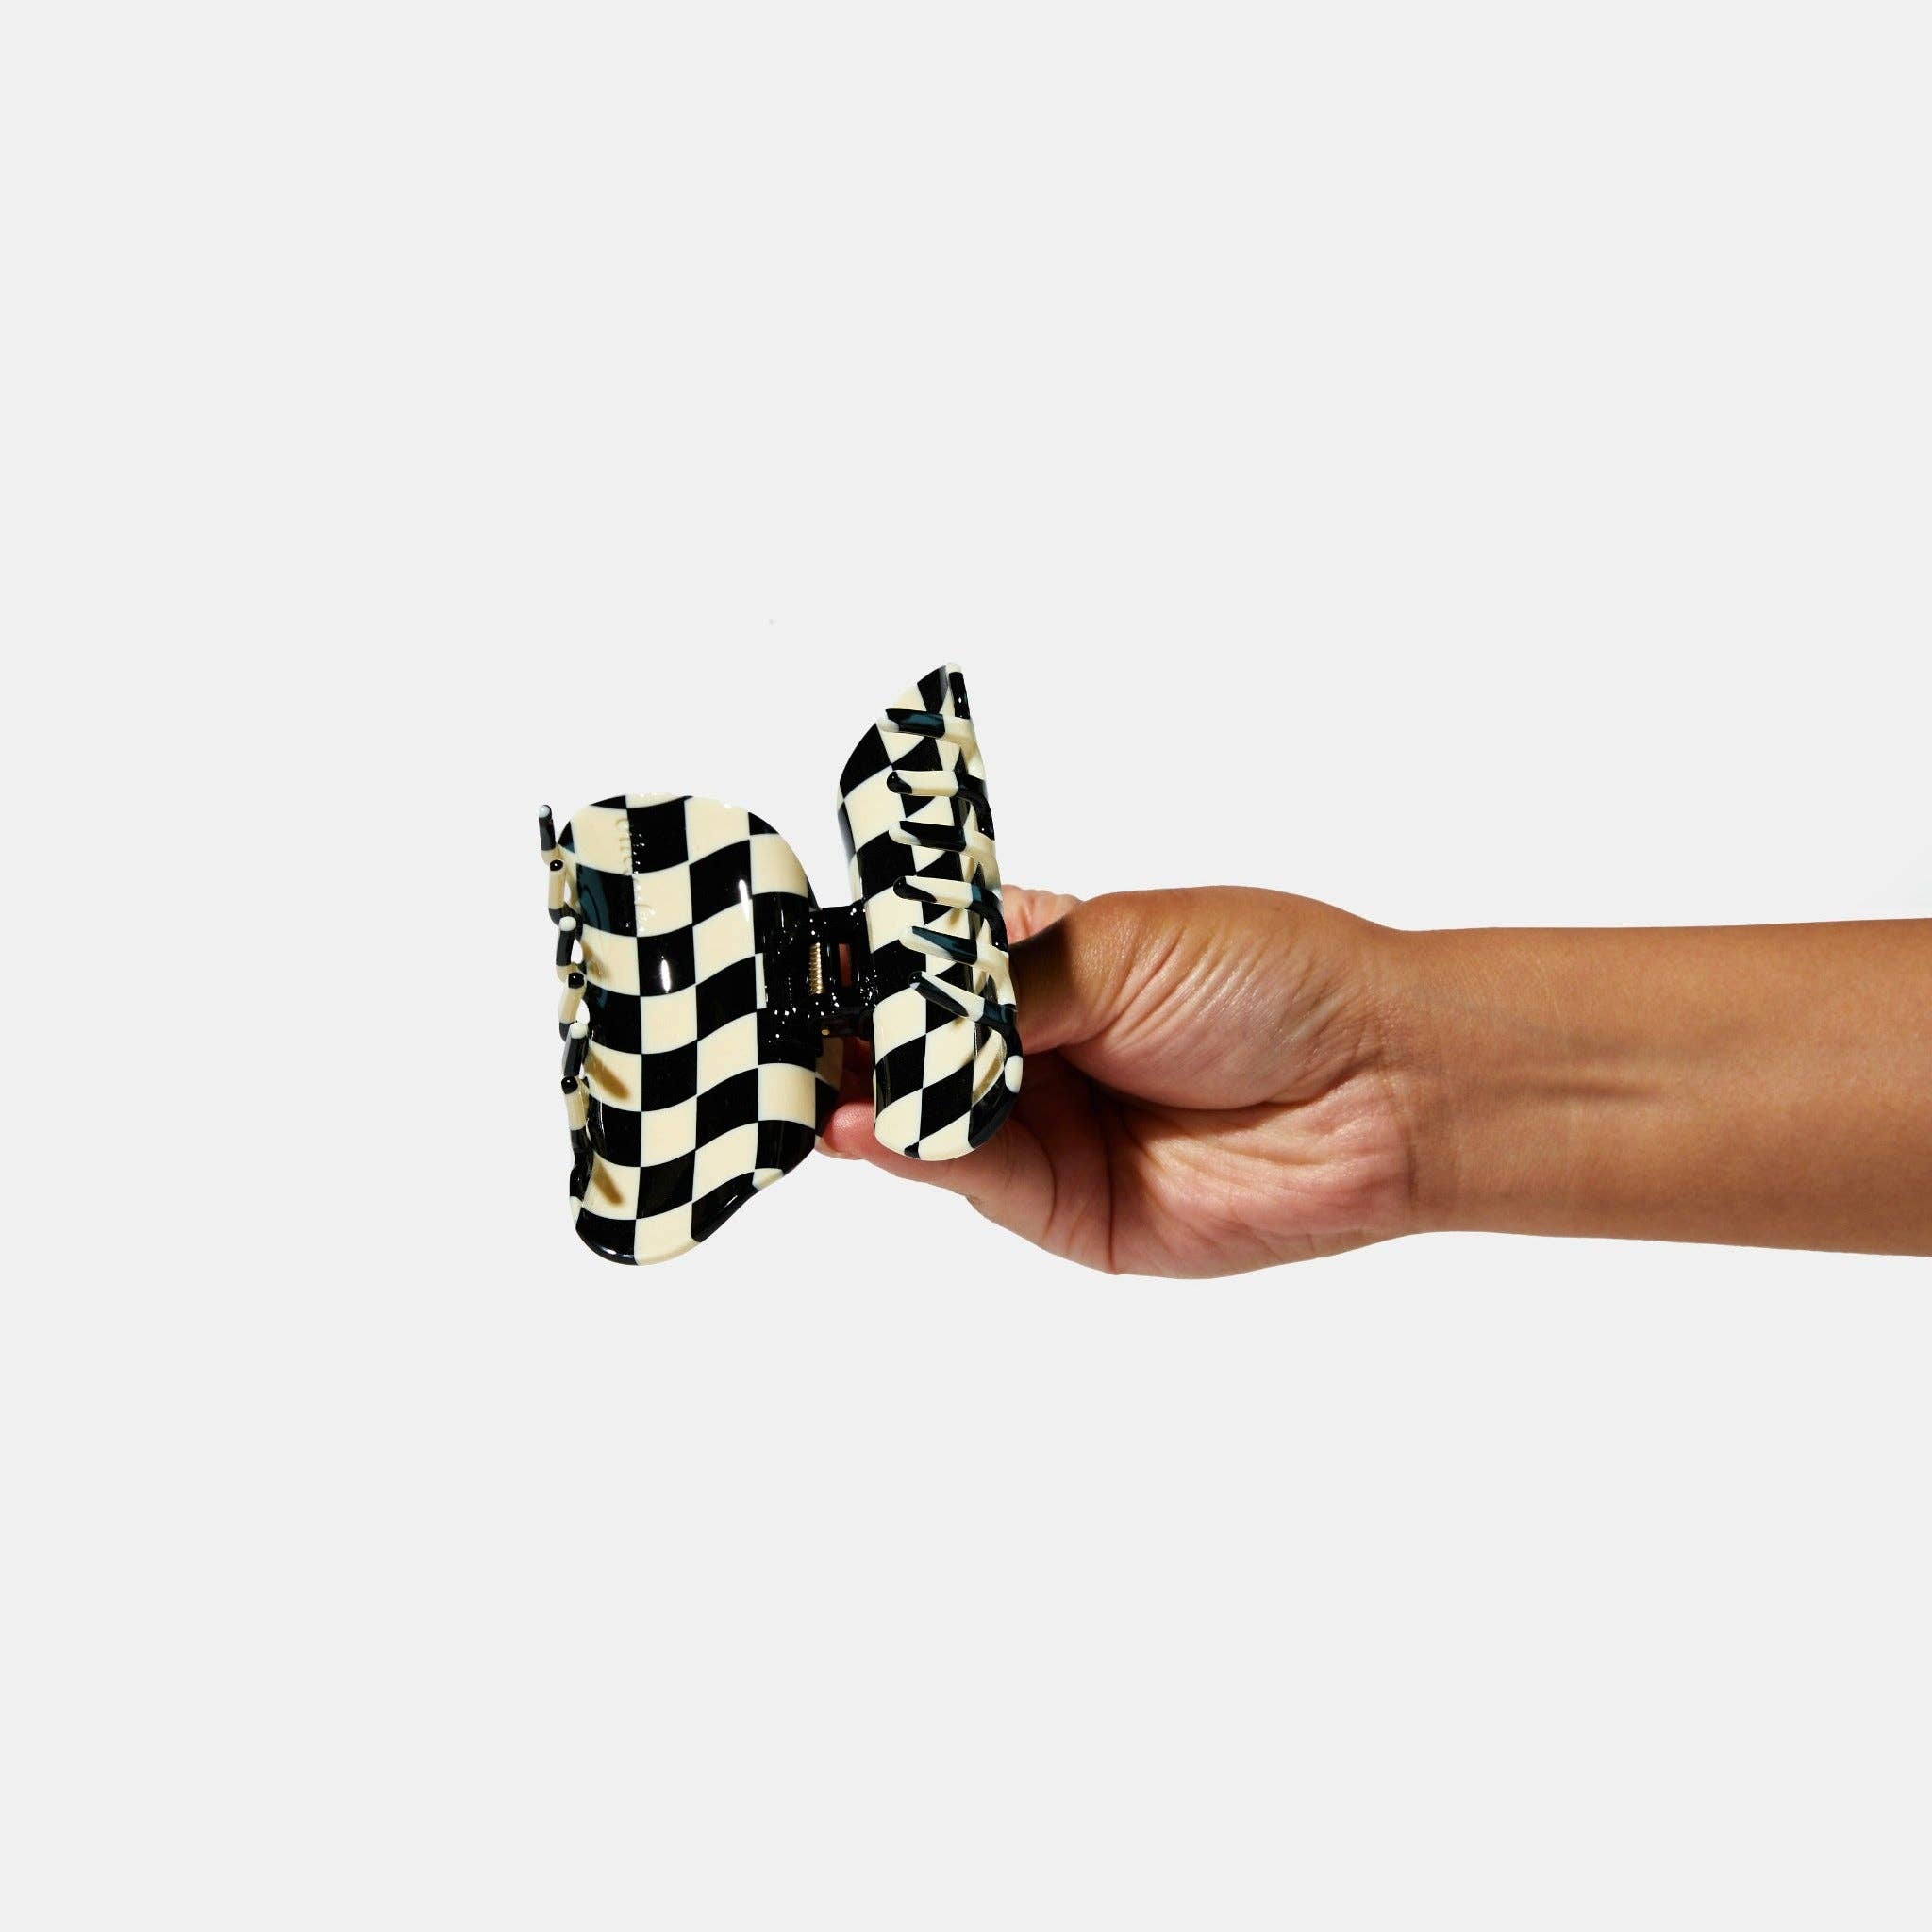 Checker Claw in Black/White by Chunks